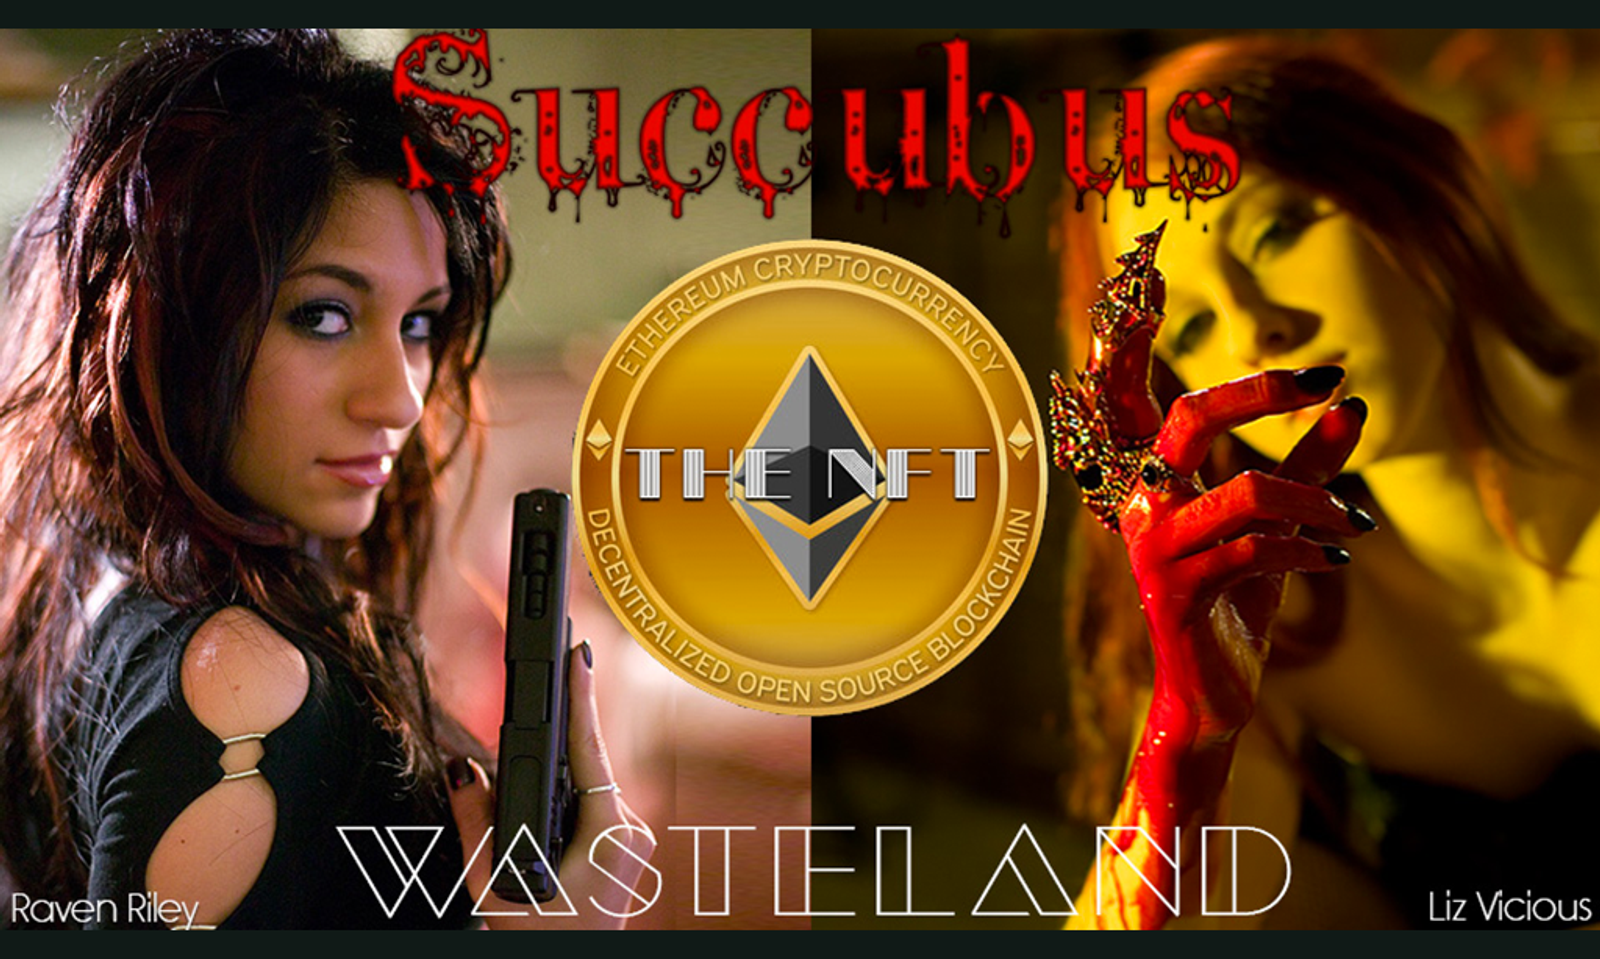 Wasteland Releases 'Succubus', the First Adult Film Mashup NFT